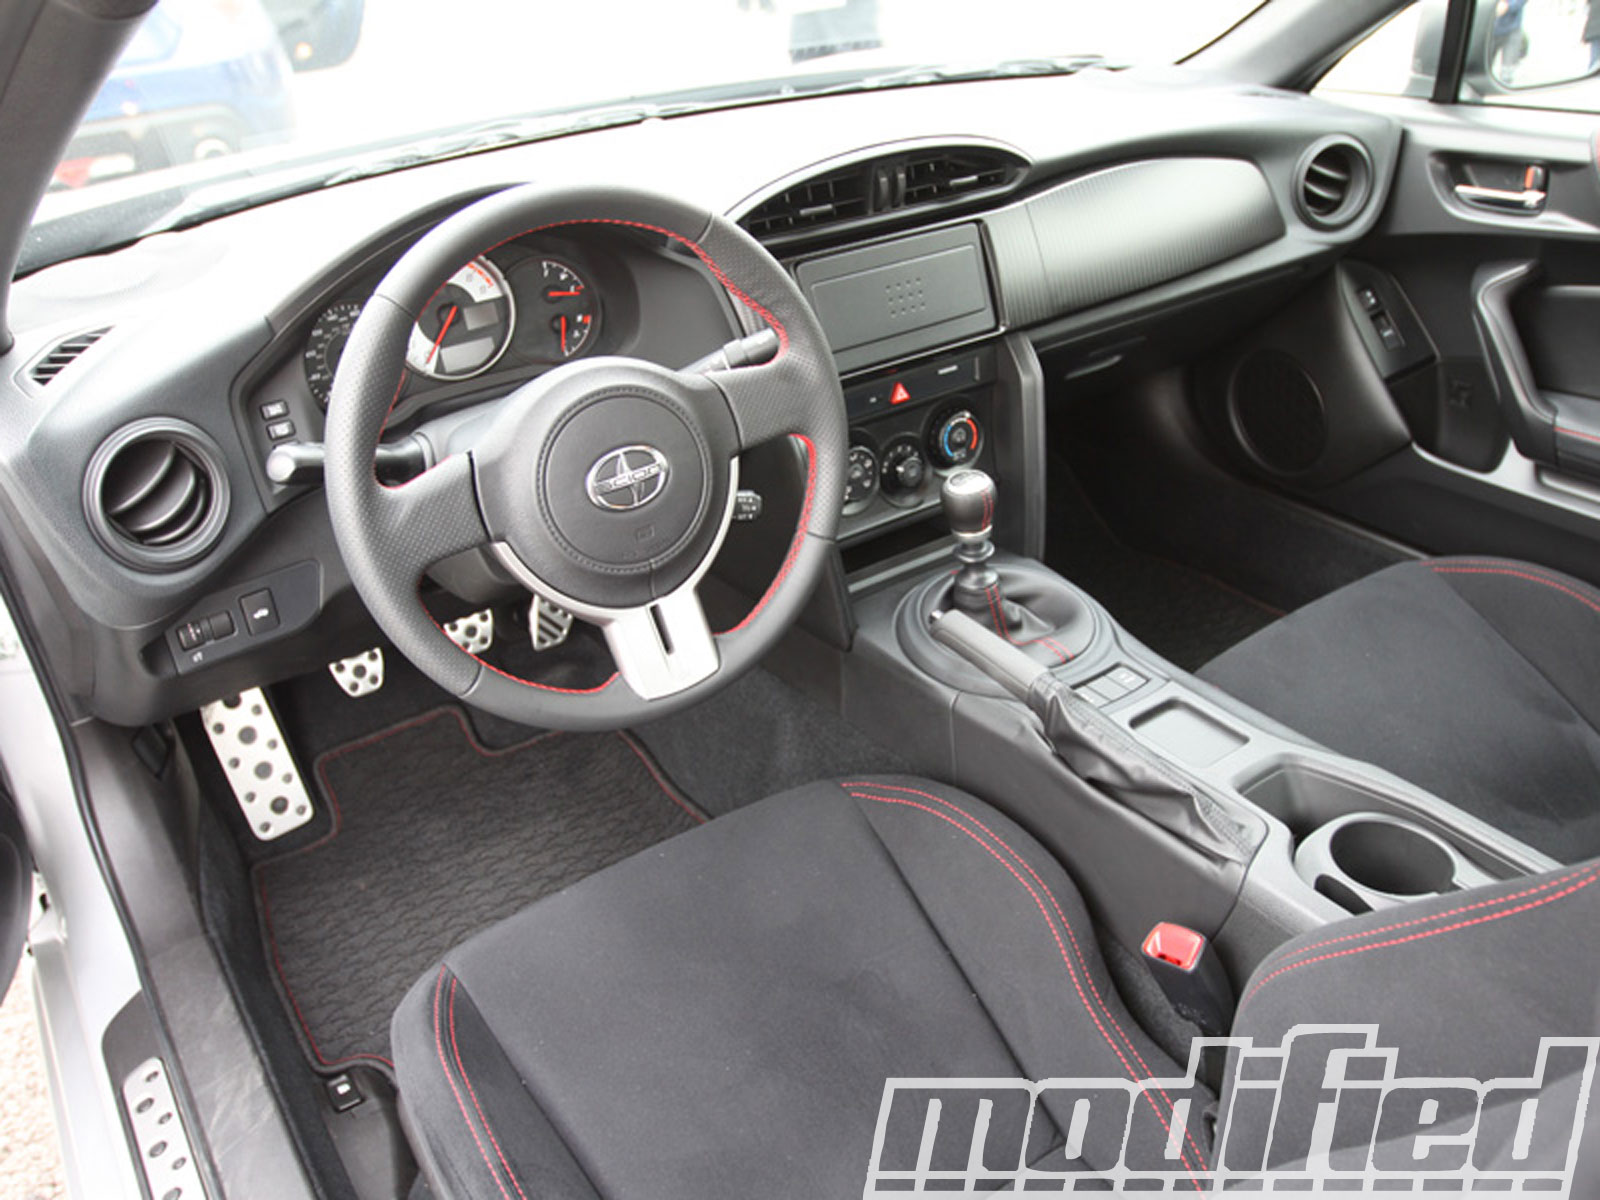 Toyota Scion Fr S Wallpapers High Quality Download Free